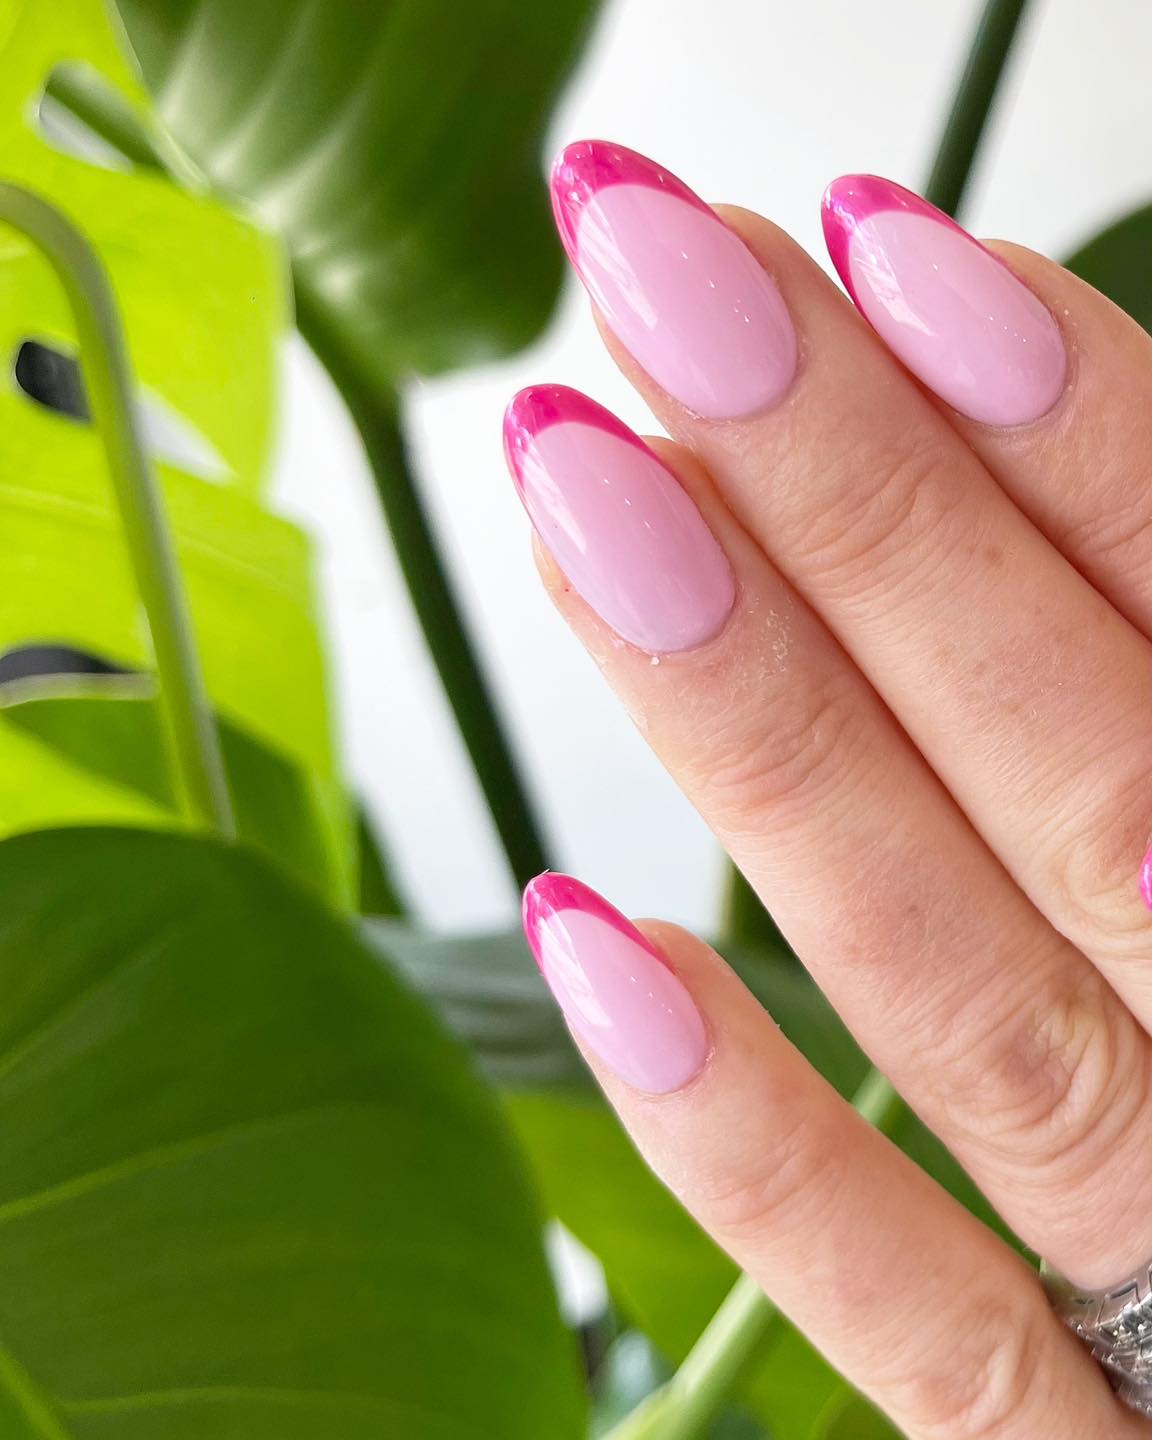 Megan Fox's “Aura Nails” Are Almost Too On-Brand | Teen Vogue